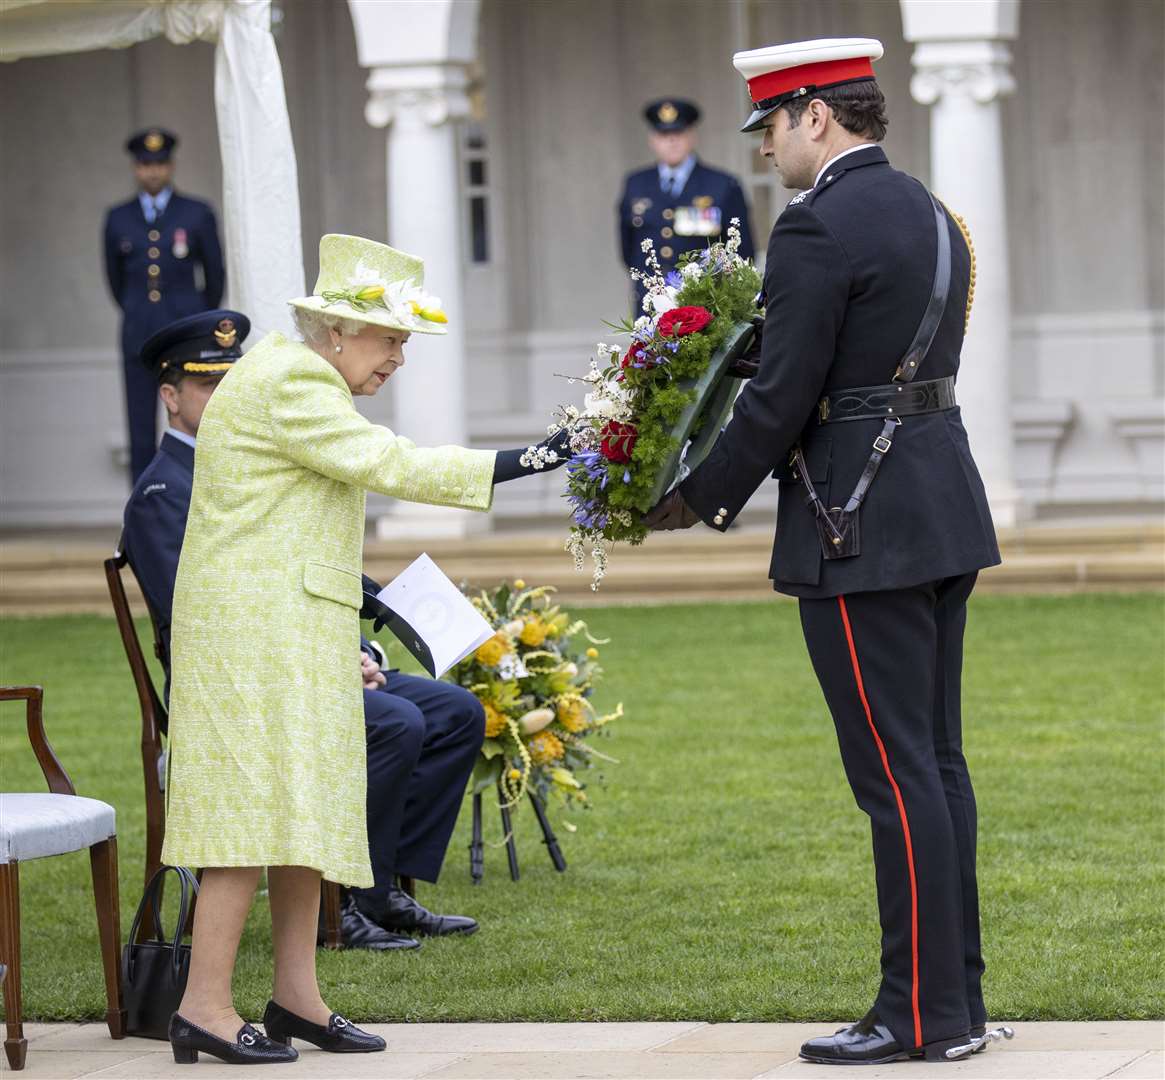 The Queen touches her wreath before it is laid on her behalf (Steve Reigate/Daily Express/PA)